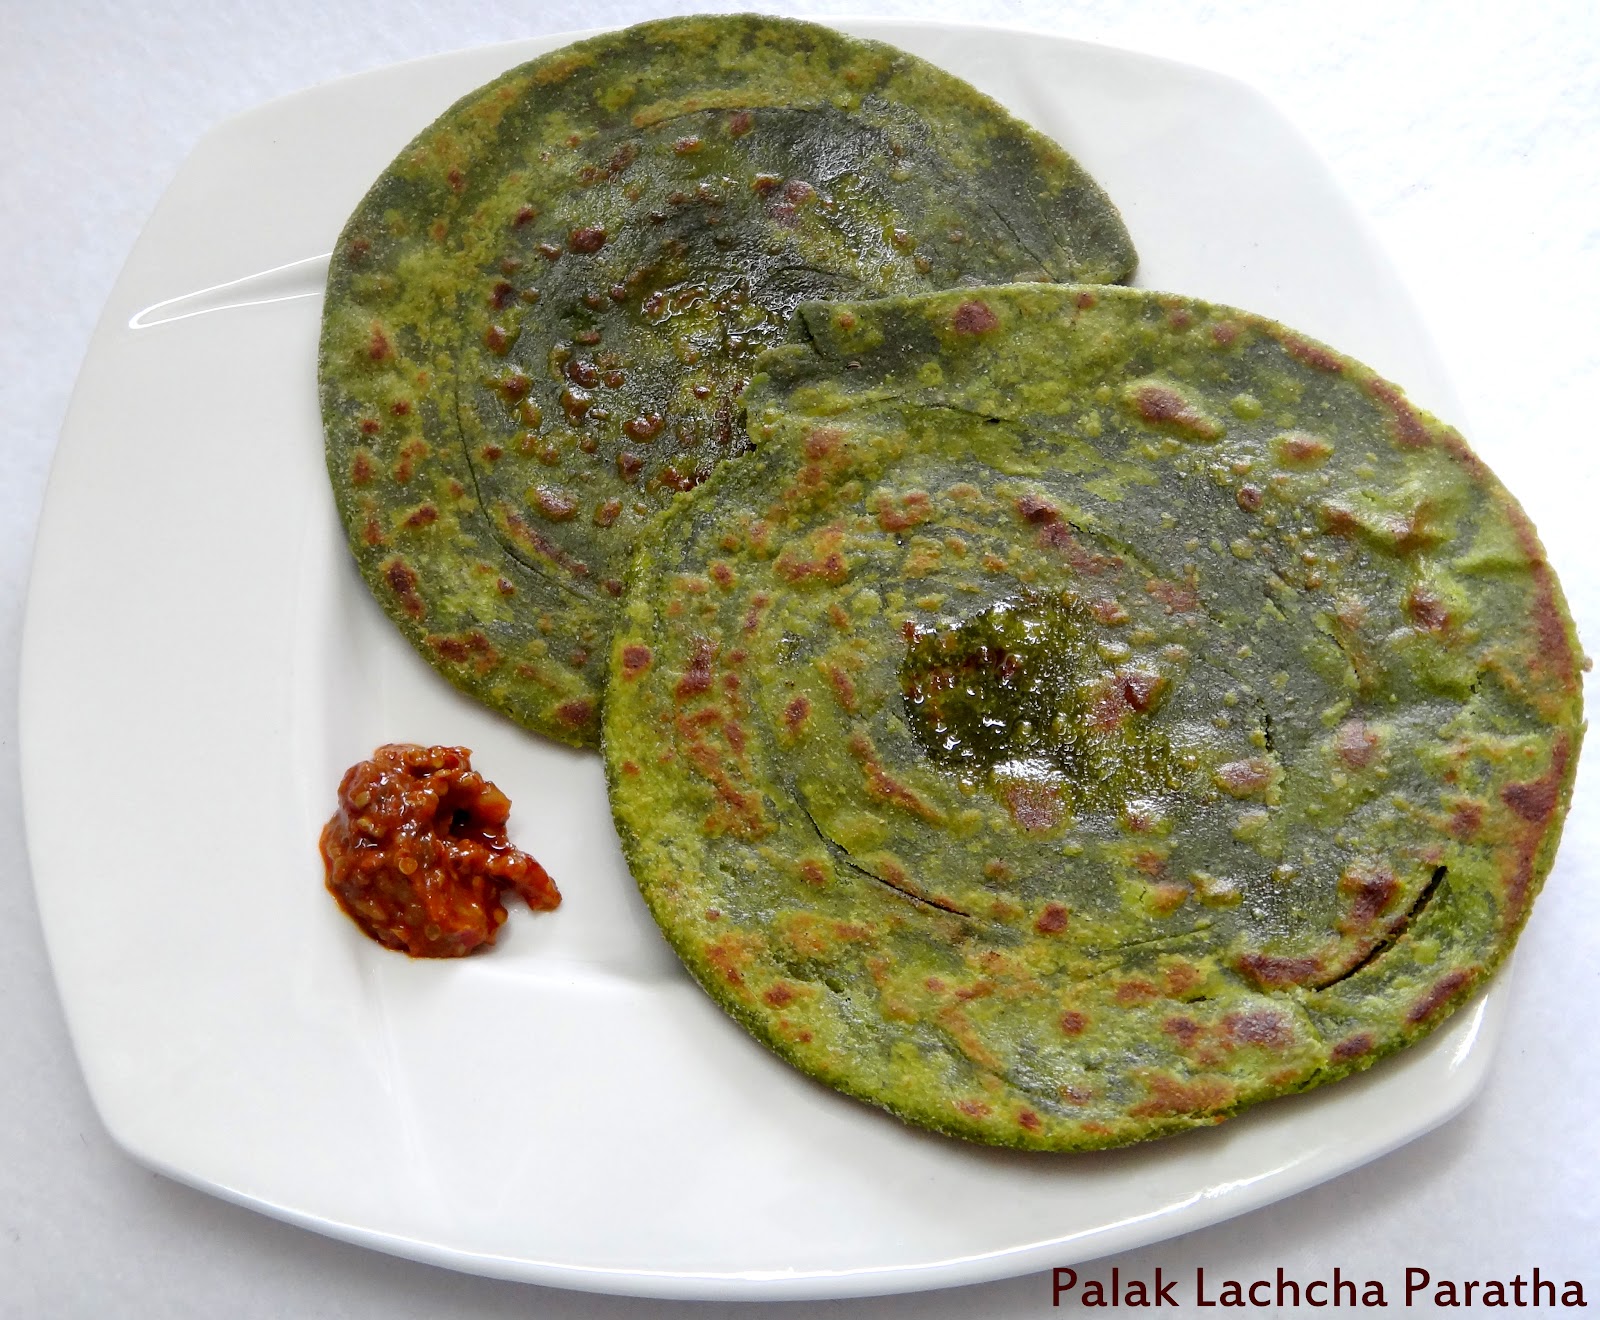 Image result for palak lachcha paratha